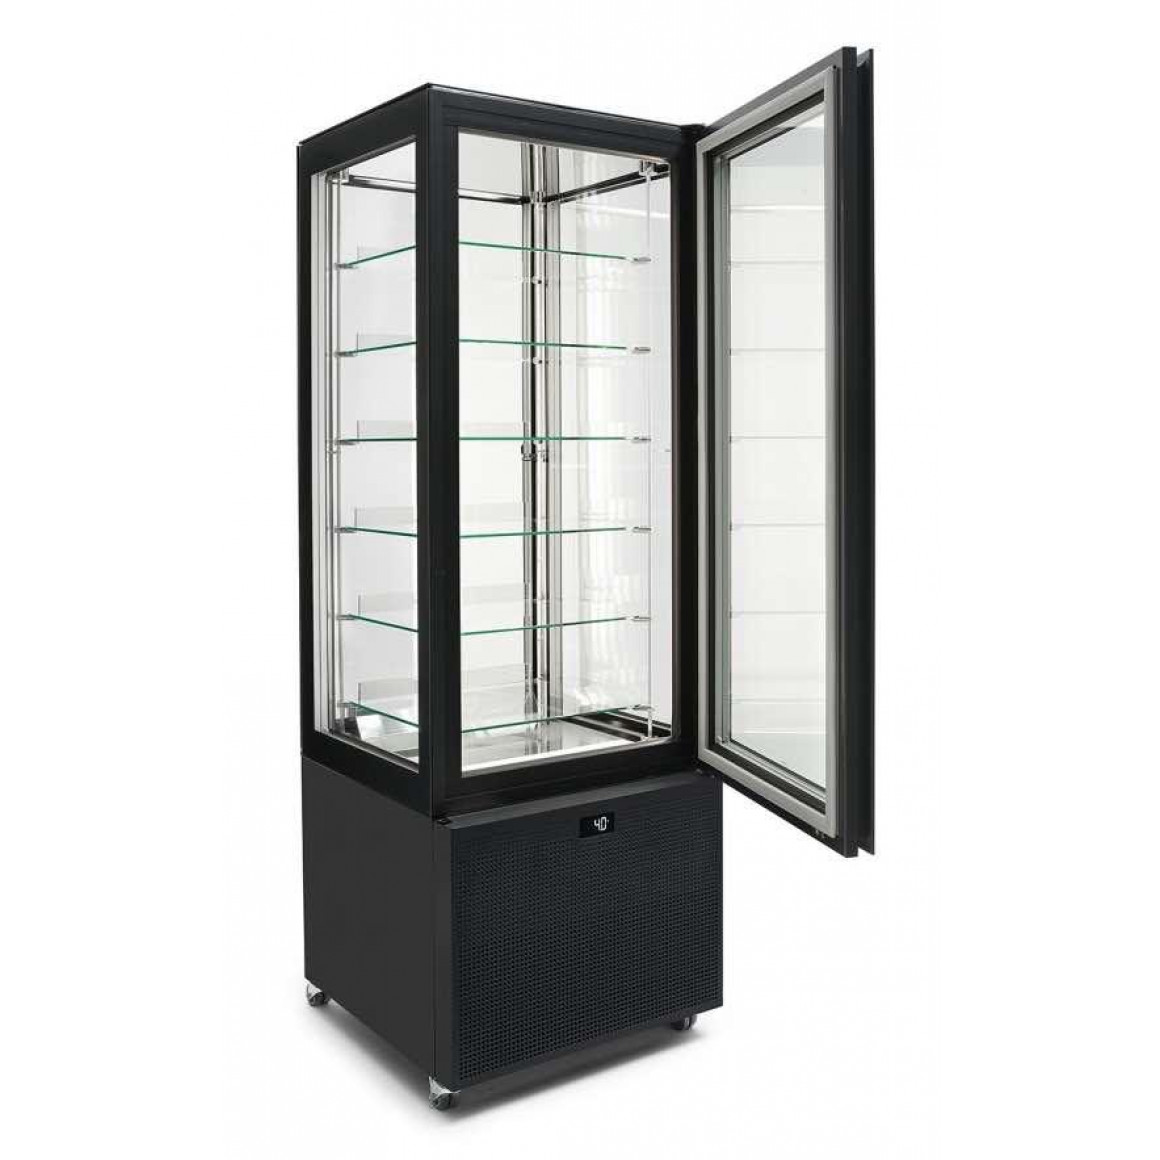 Refrigerated showcases